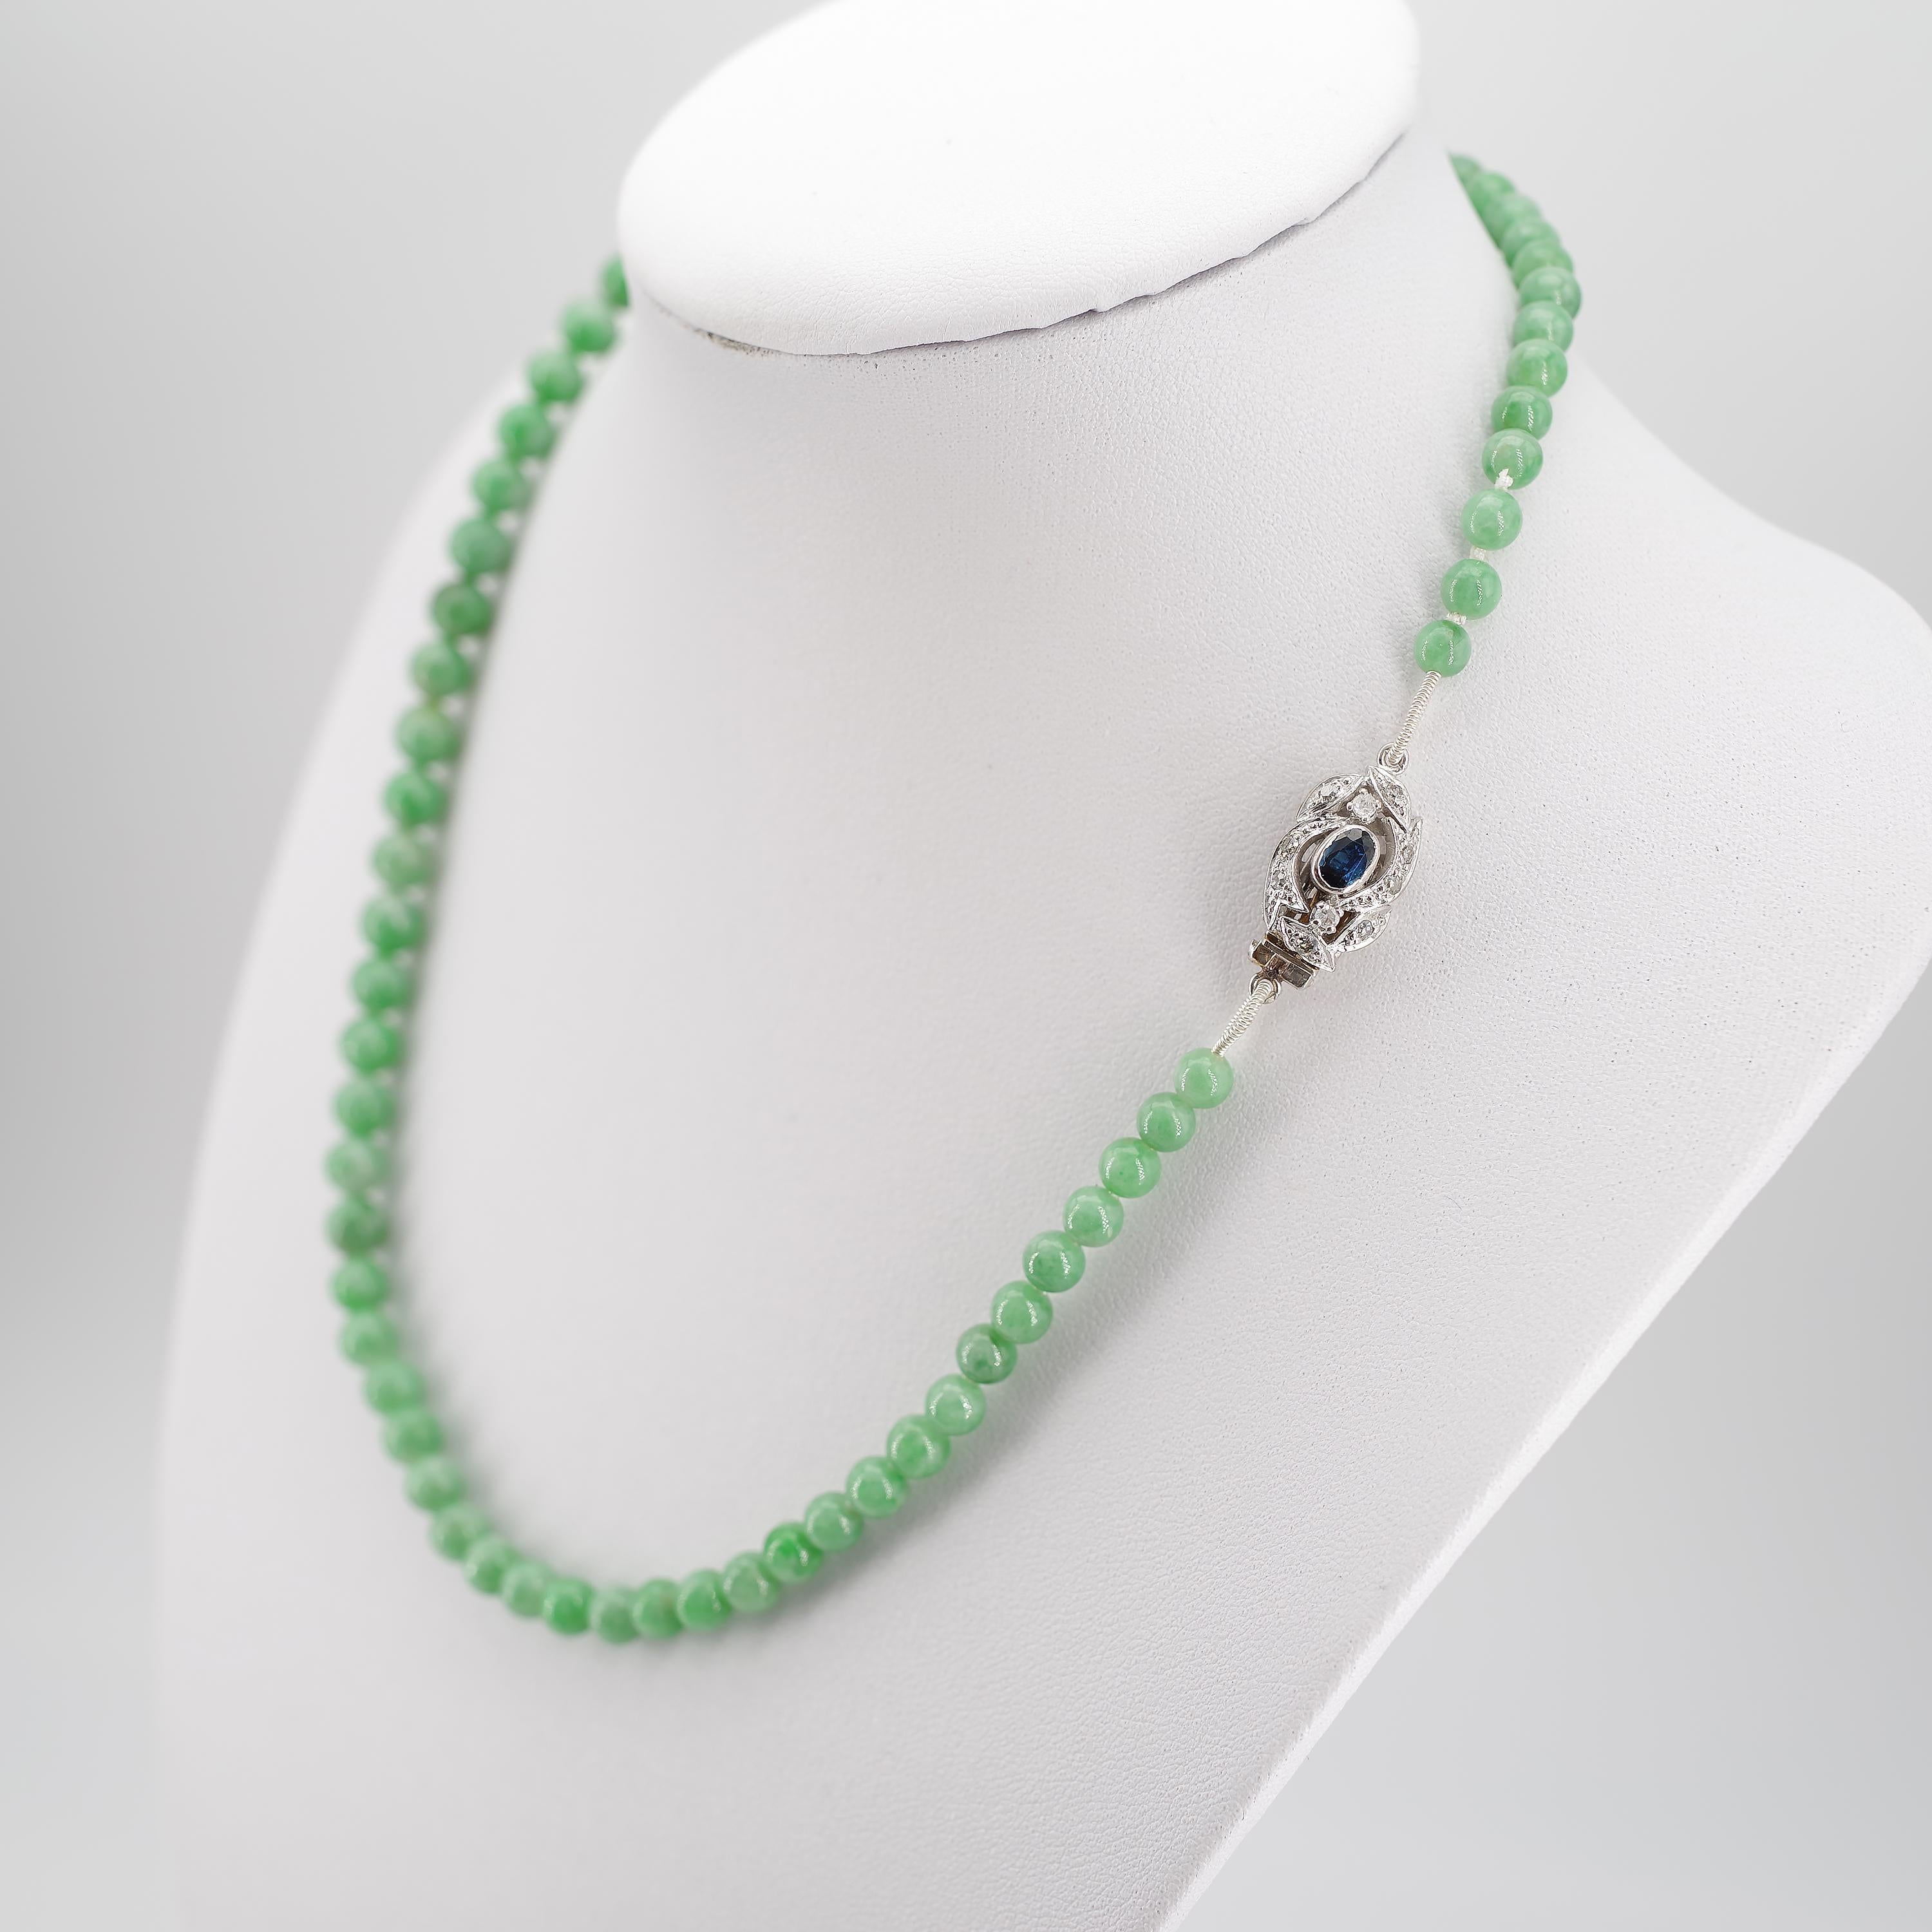 This refreshing, bright minty green jadeite jade necklace from the Art Deco era is just sixteen inches in length and features an elegant clasp of 18K white gold centered with a gemmy little natural oval cut sapphire of about one-quarter carat. Small